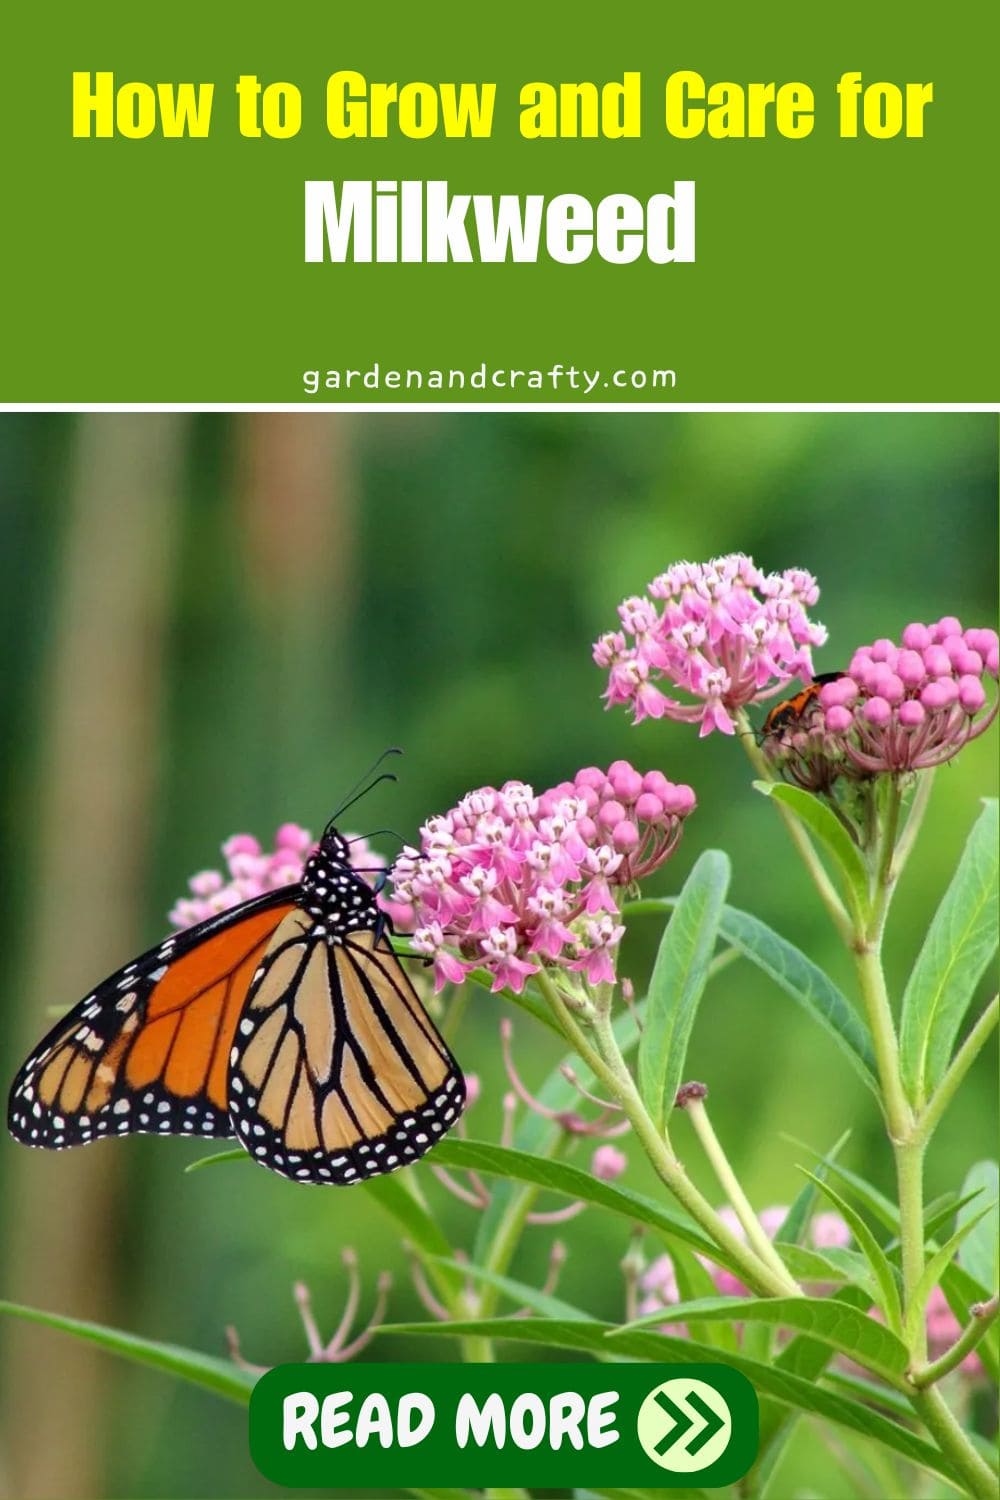 How to Grow and Care for Milkweed